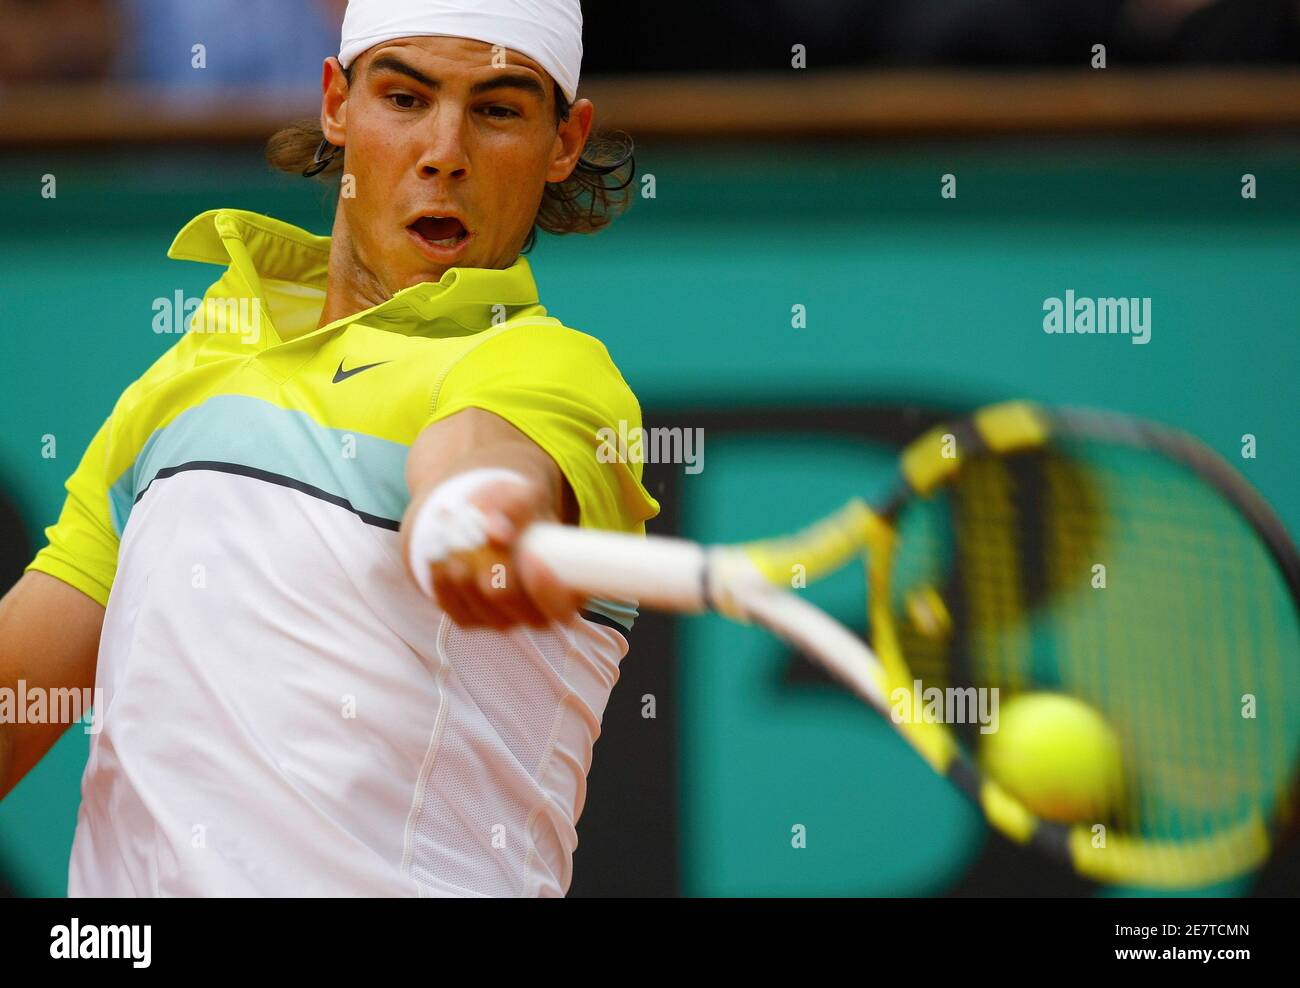 Rafael Nadal of Spain hits a return to Brian Dabul of Argentina during an  exhibition tennis match on the Philippe Chatrier court at Roland Garros,  ahead of the start of French Open